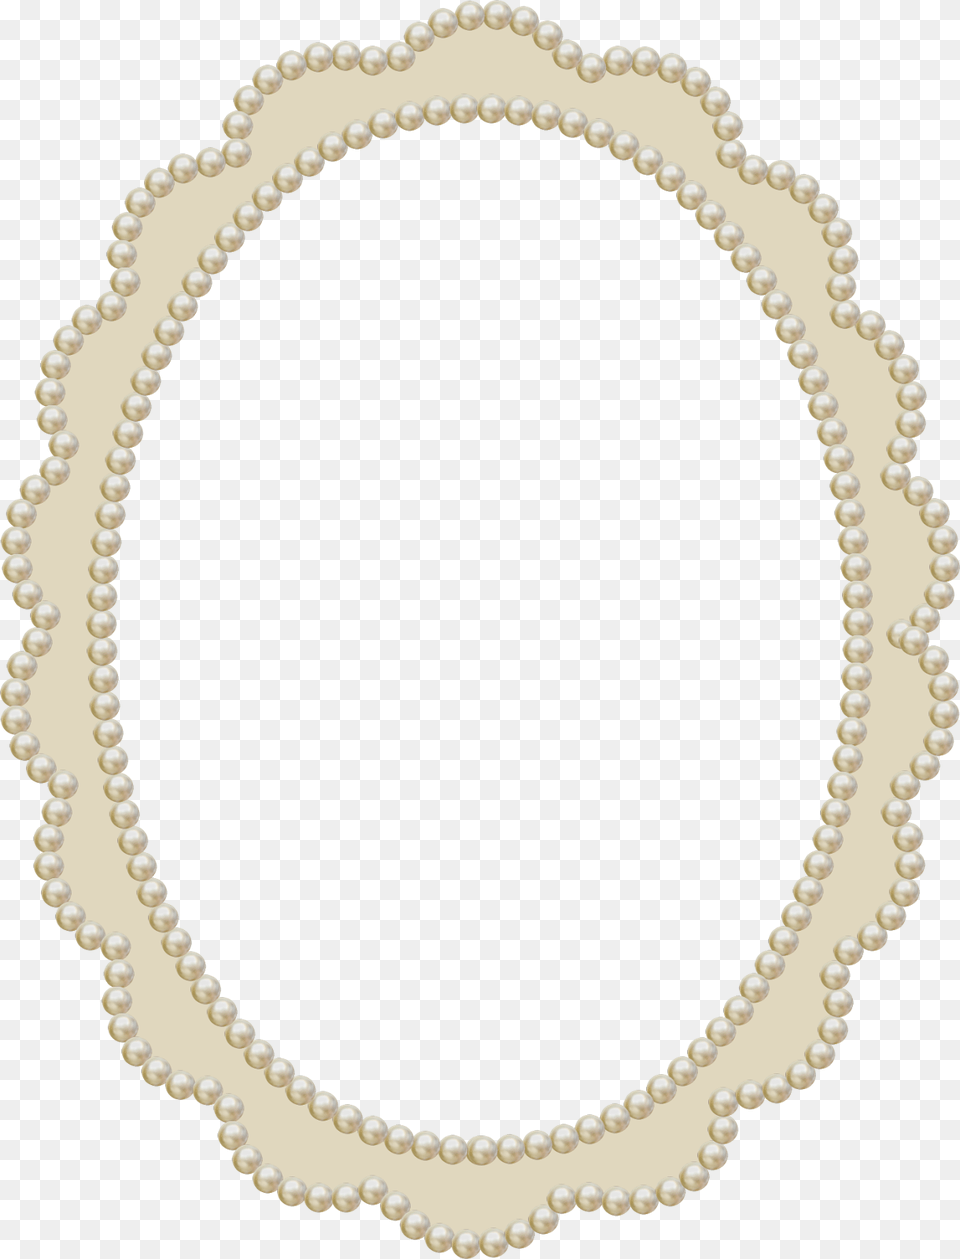 Ivory Pearl Frame Pearl, Accessories, Jewelry, Necklace, Oval Png Image